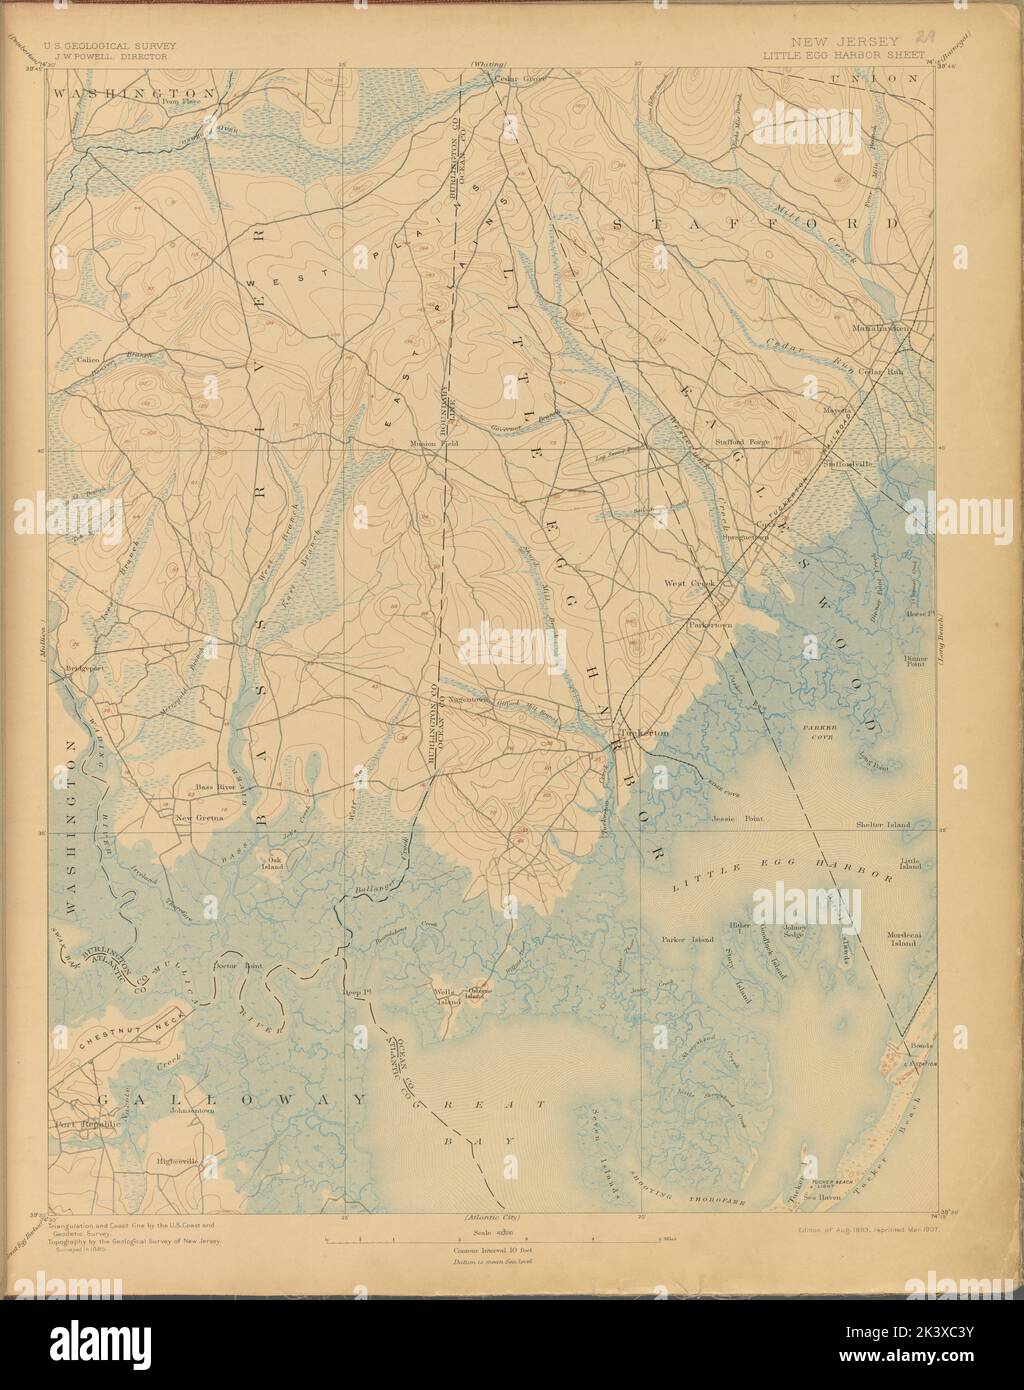 Little Egg Harbor, survey of 1885, ed. of 1893, repr. 1907. 1899 - 1926. Cartographic. Atlases, Maps. Lionel Pincus and Princess Firyal Map Division. New Jersey , Maps Stock Photo